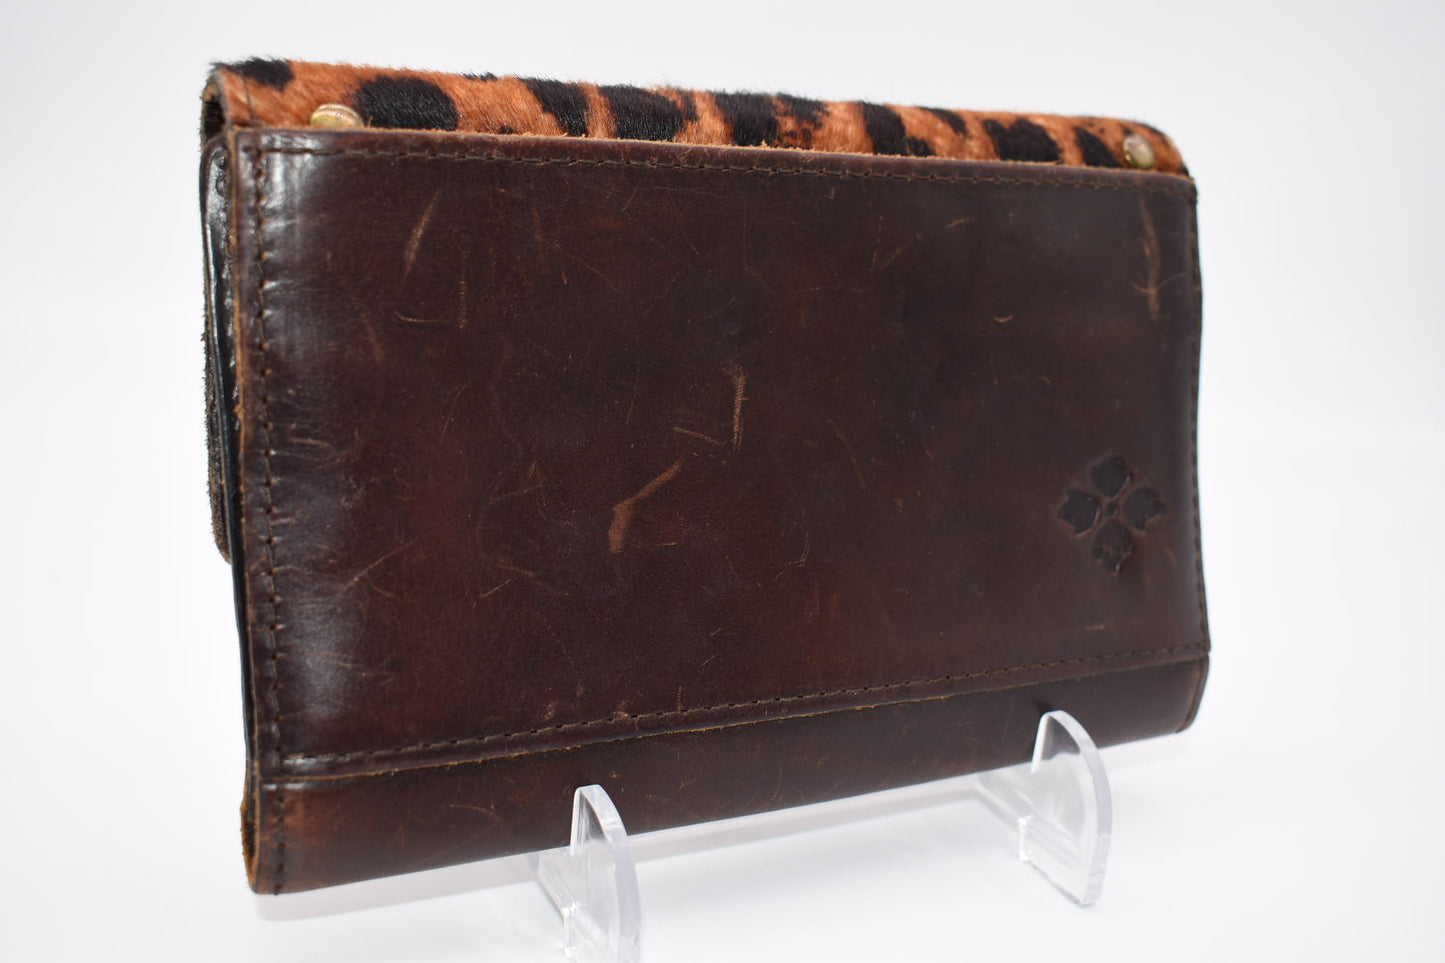 Patricia Nash Colli Wallet in Studded Leopard